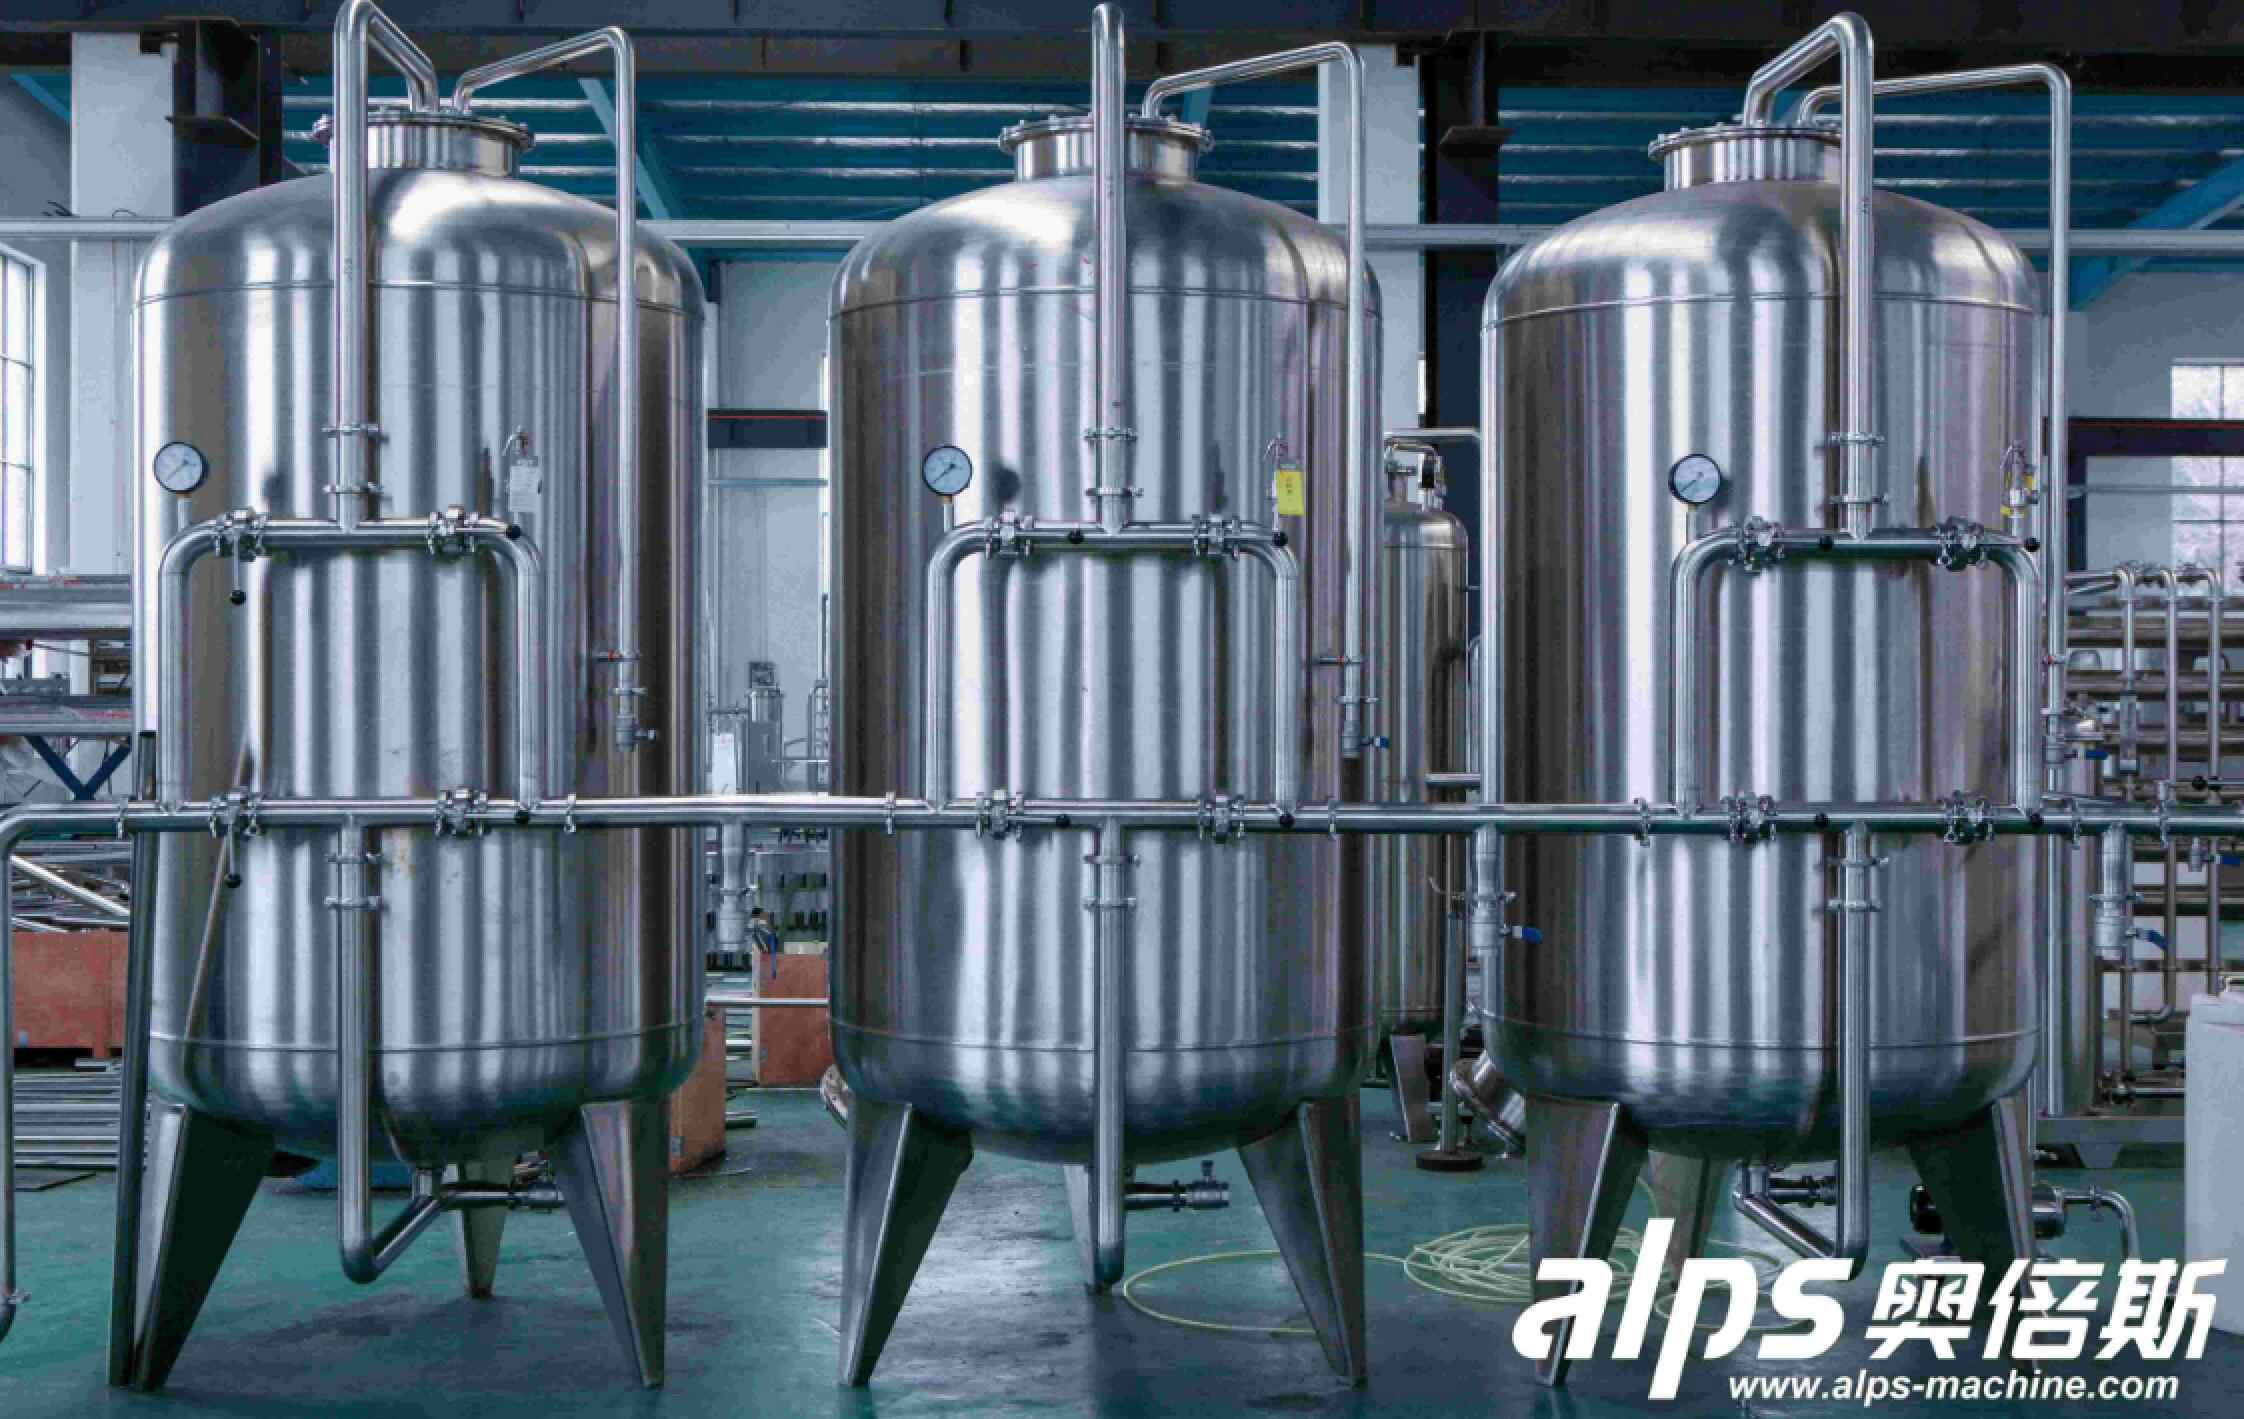 The role of water treatment multi-media filter tank